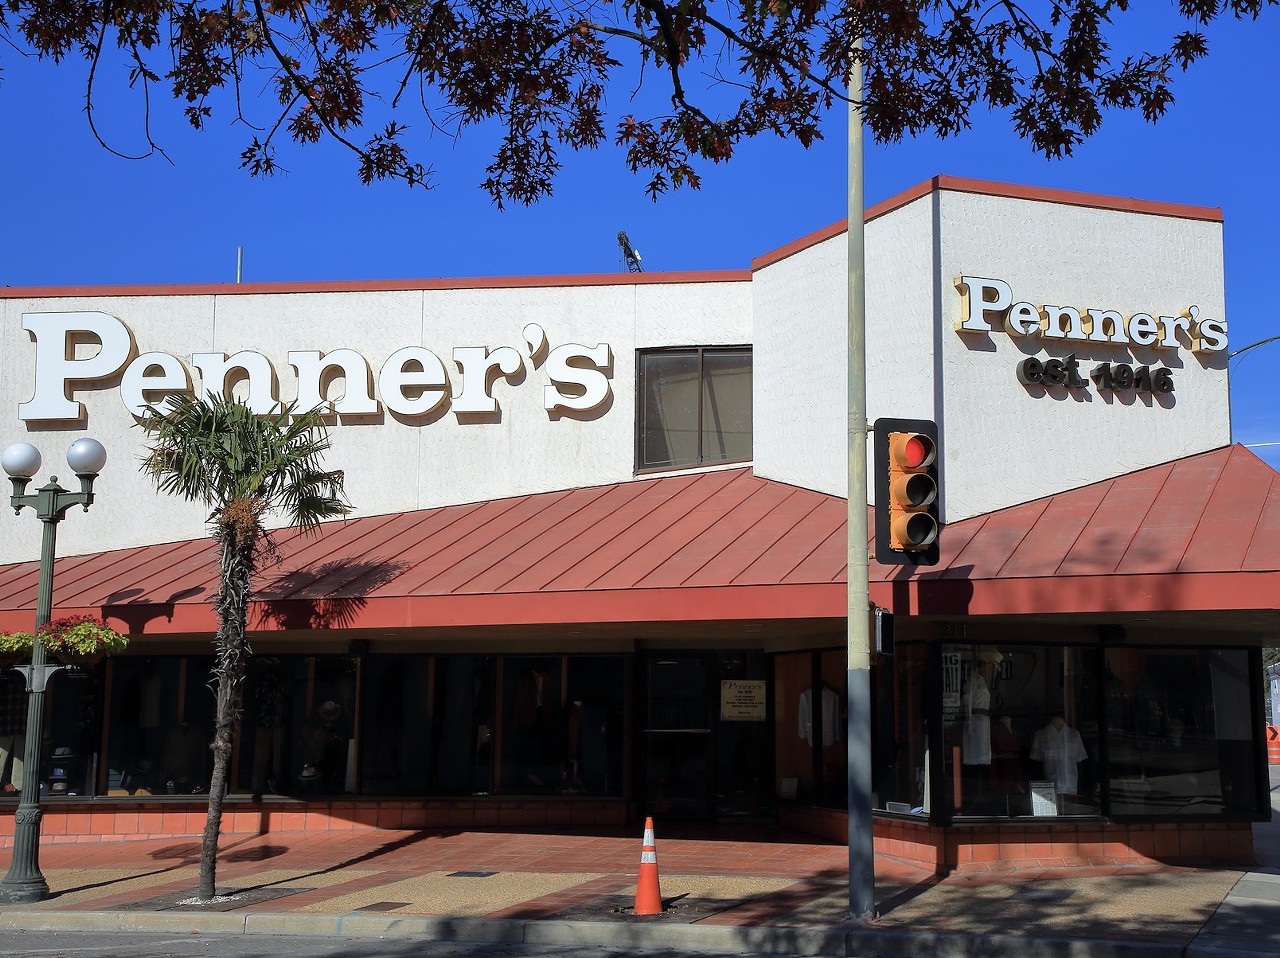 Oldest Store: Penner's
331 W. Commerce St.
Although this iconic men’s clothing store is known for puro San Anto fashions such as Stacy Adams shoes, it started life in 1916 as a second-hand shop. Founder Morris Penner’s family still runs the downtown business.